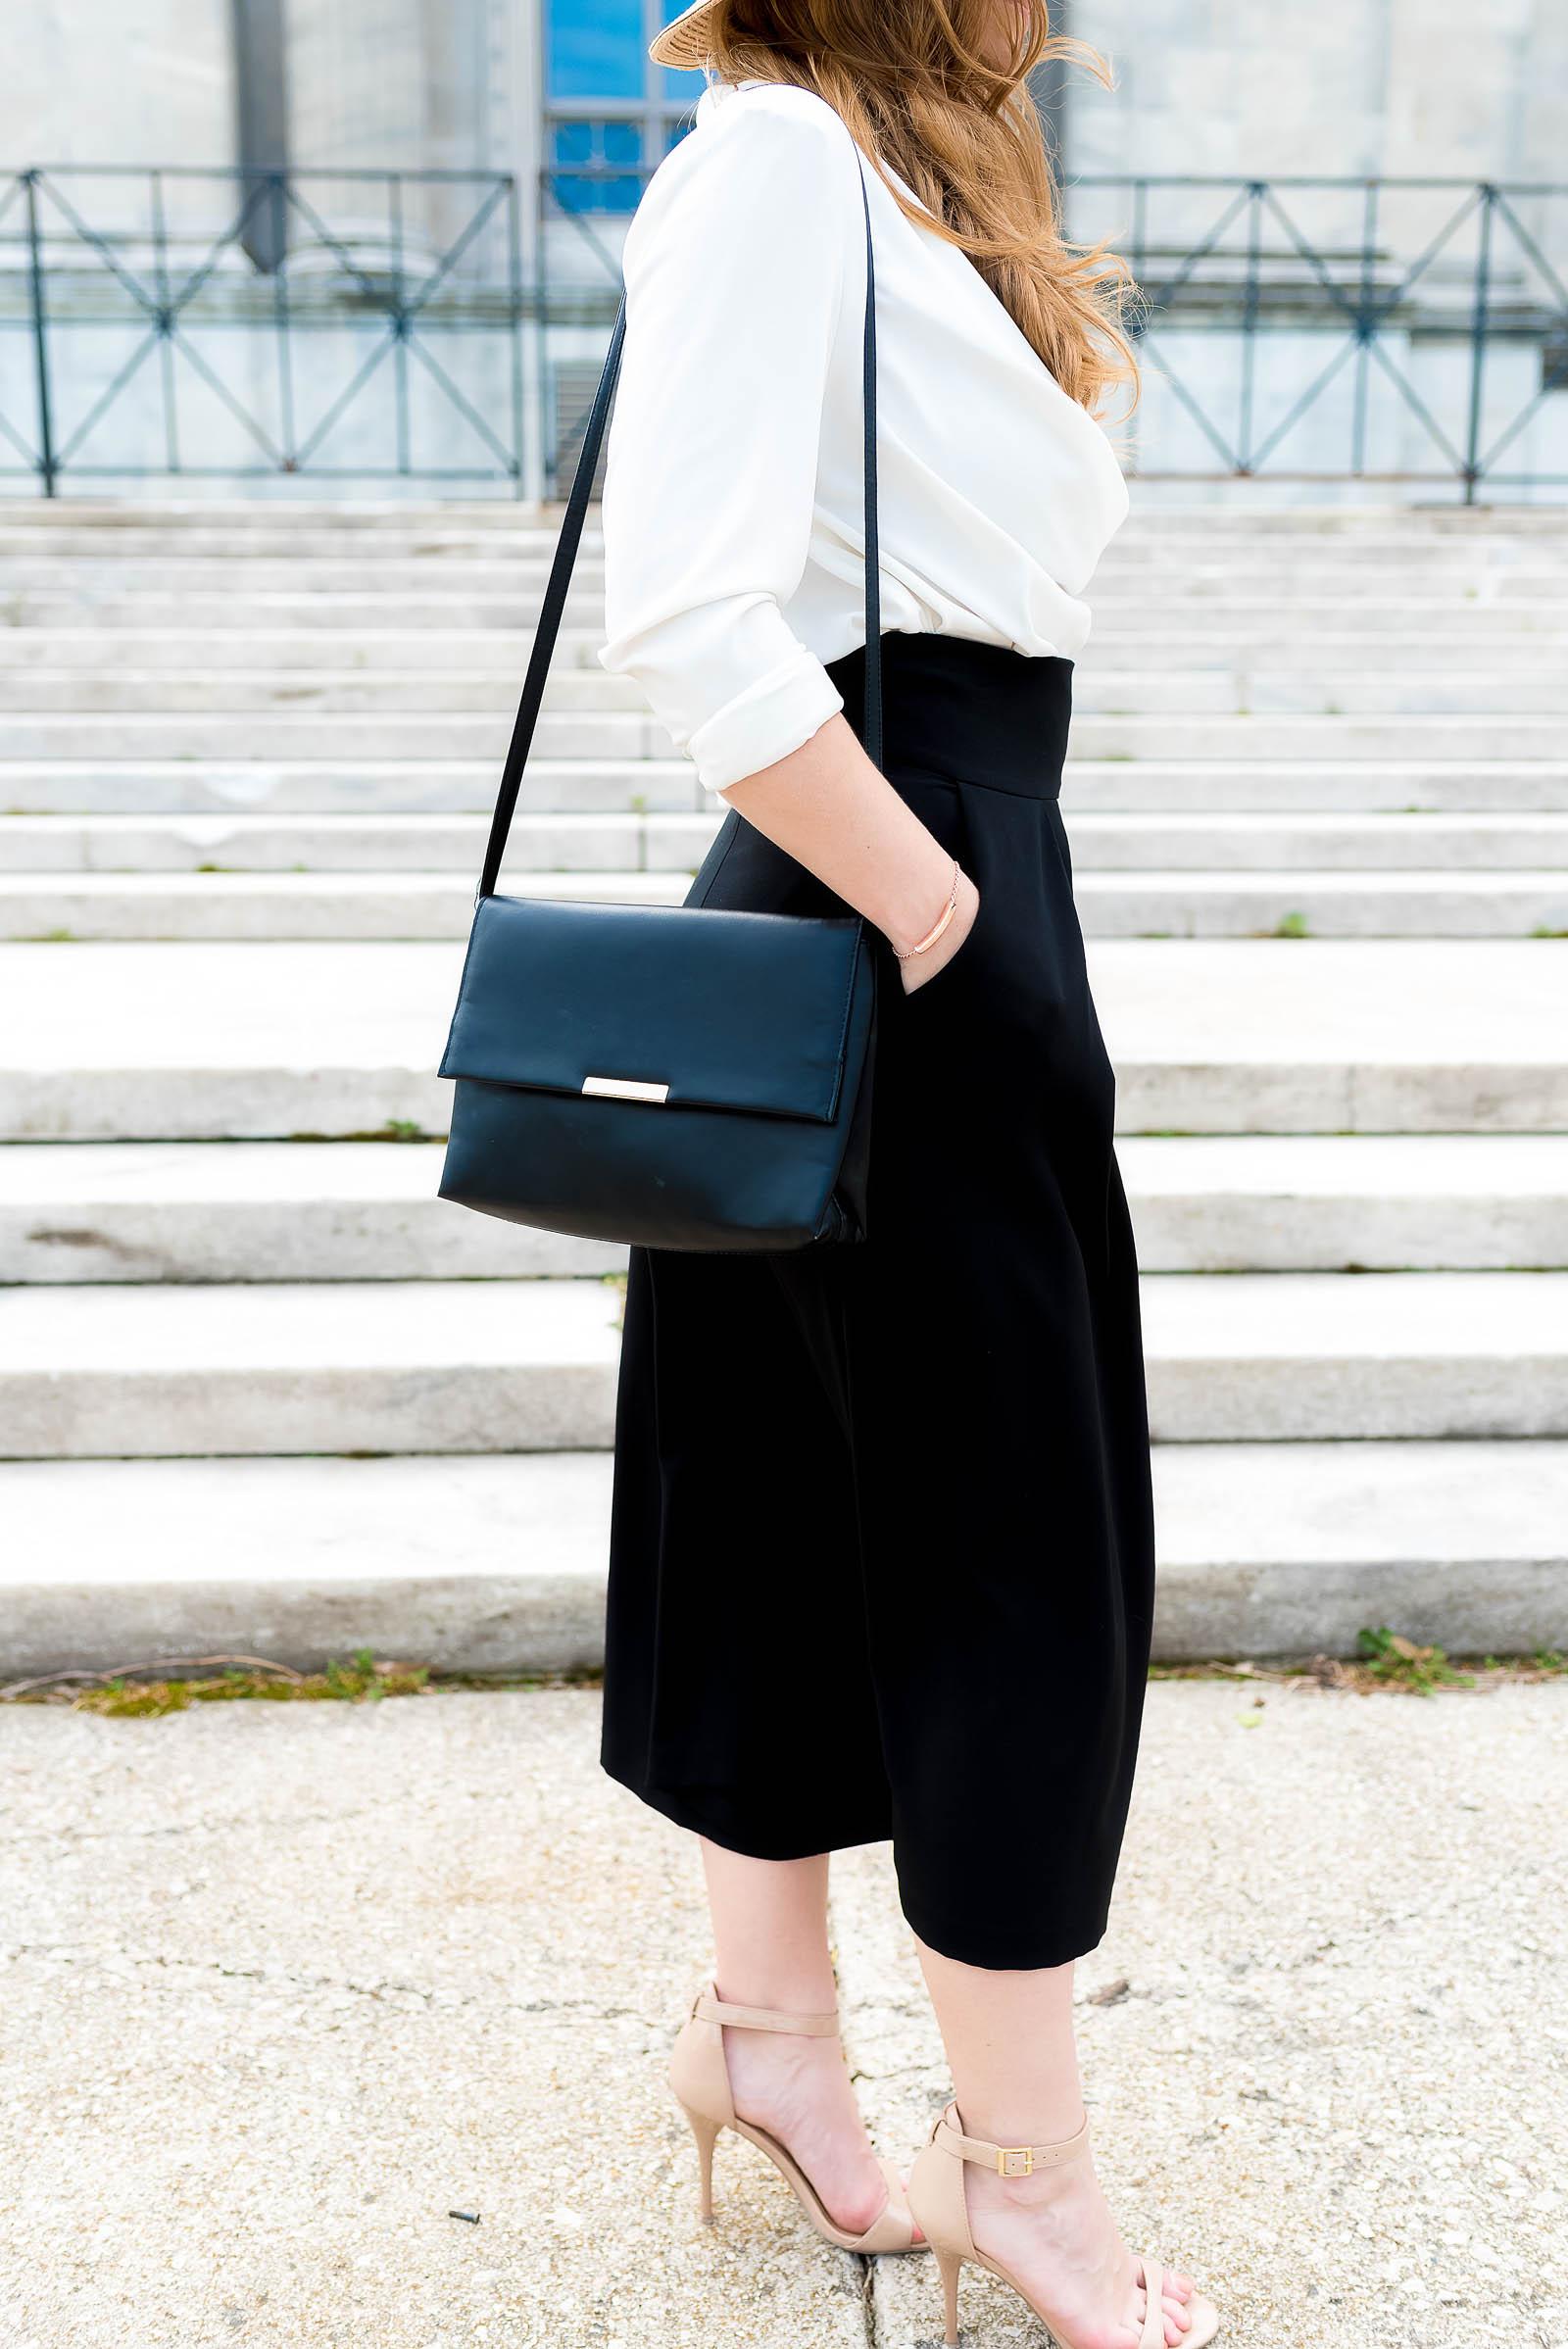 Classic Vintage-Inspired Black and White Summer Outfit